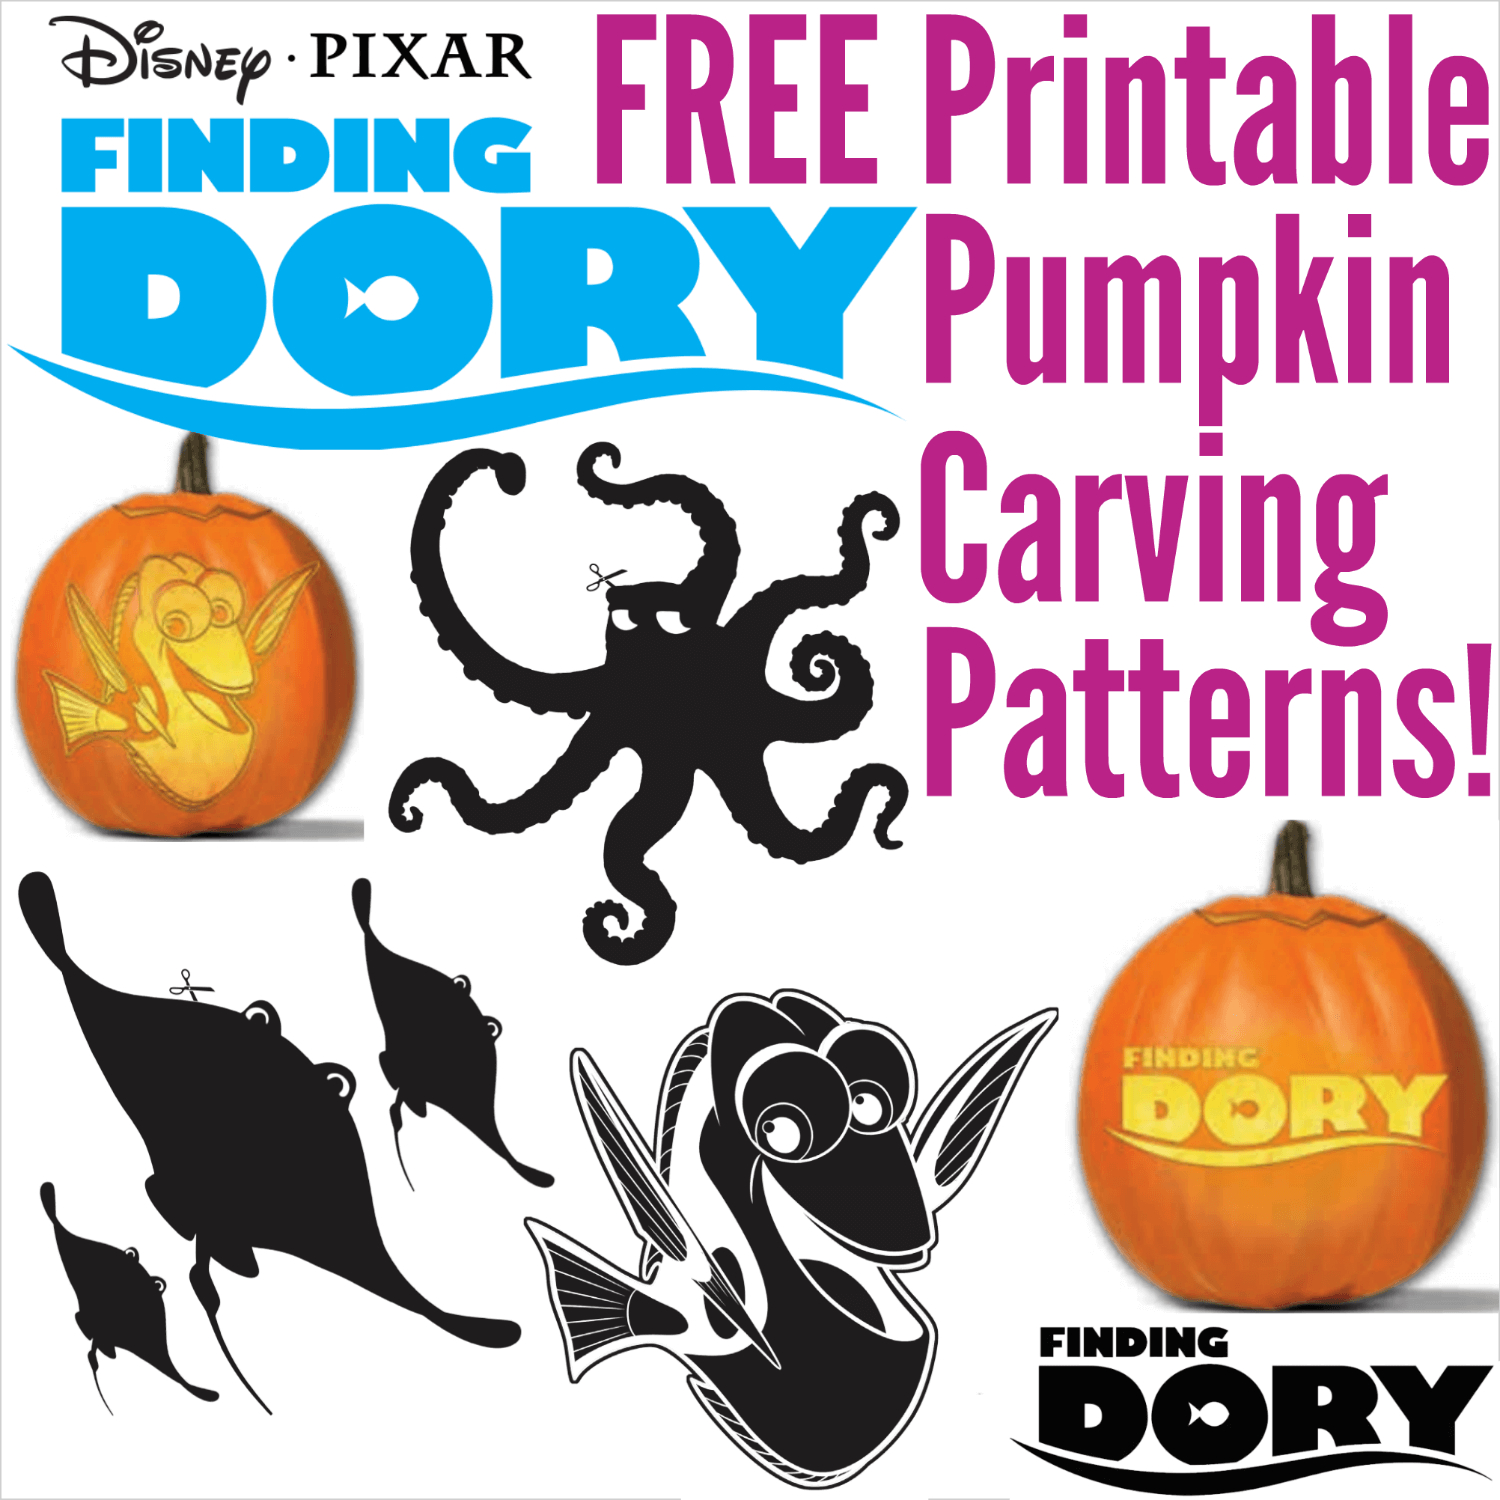 Free Finding Dory Pumpkin Carving Patterns To Print! - Pumpkin Carving Printable Patterns Free